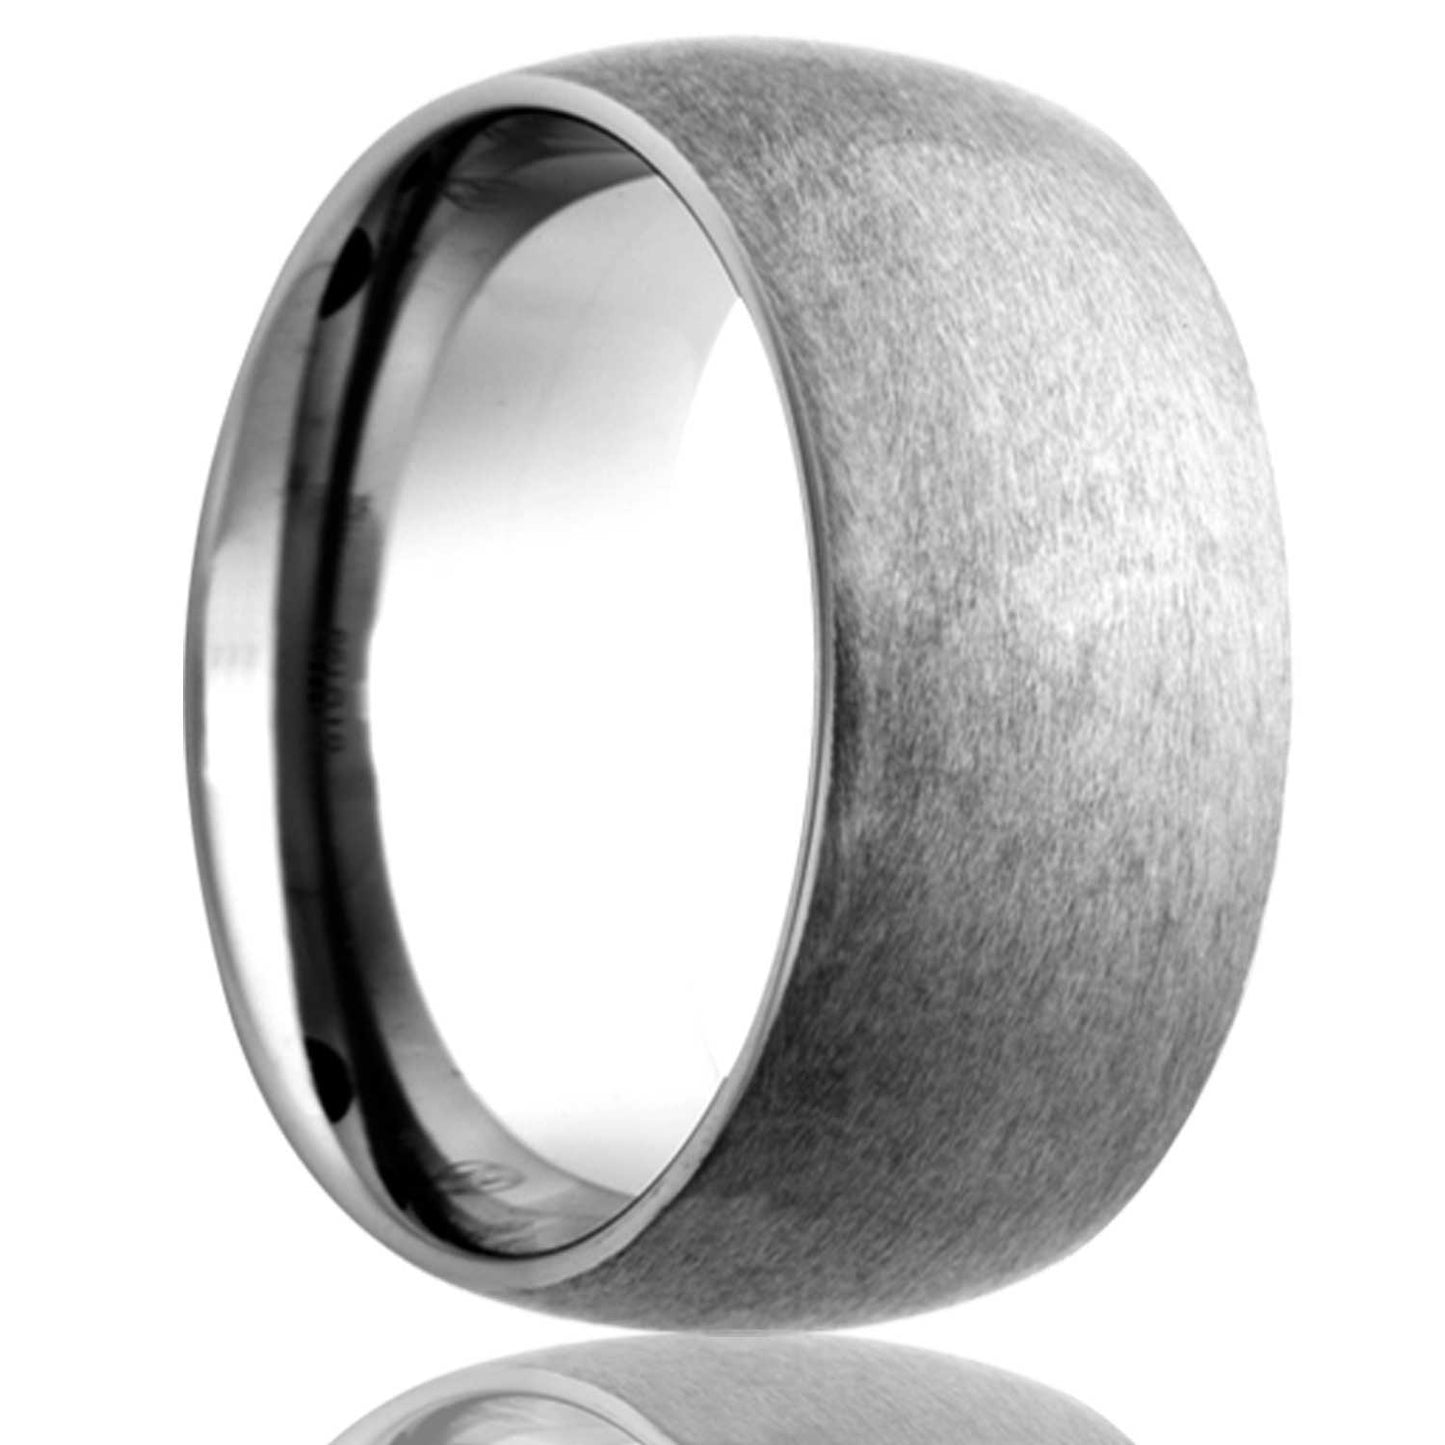 A domed satin finish cobalt wedding band displayed on a neutral white background.